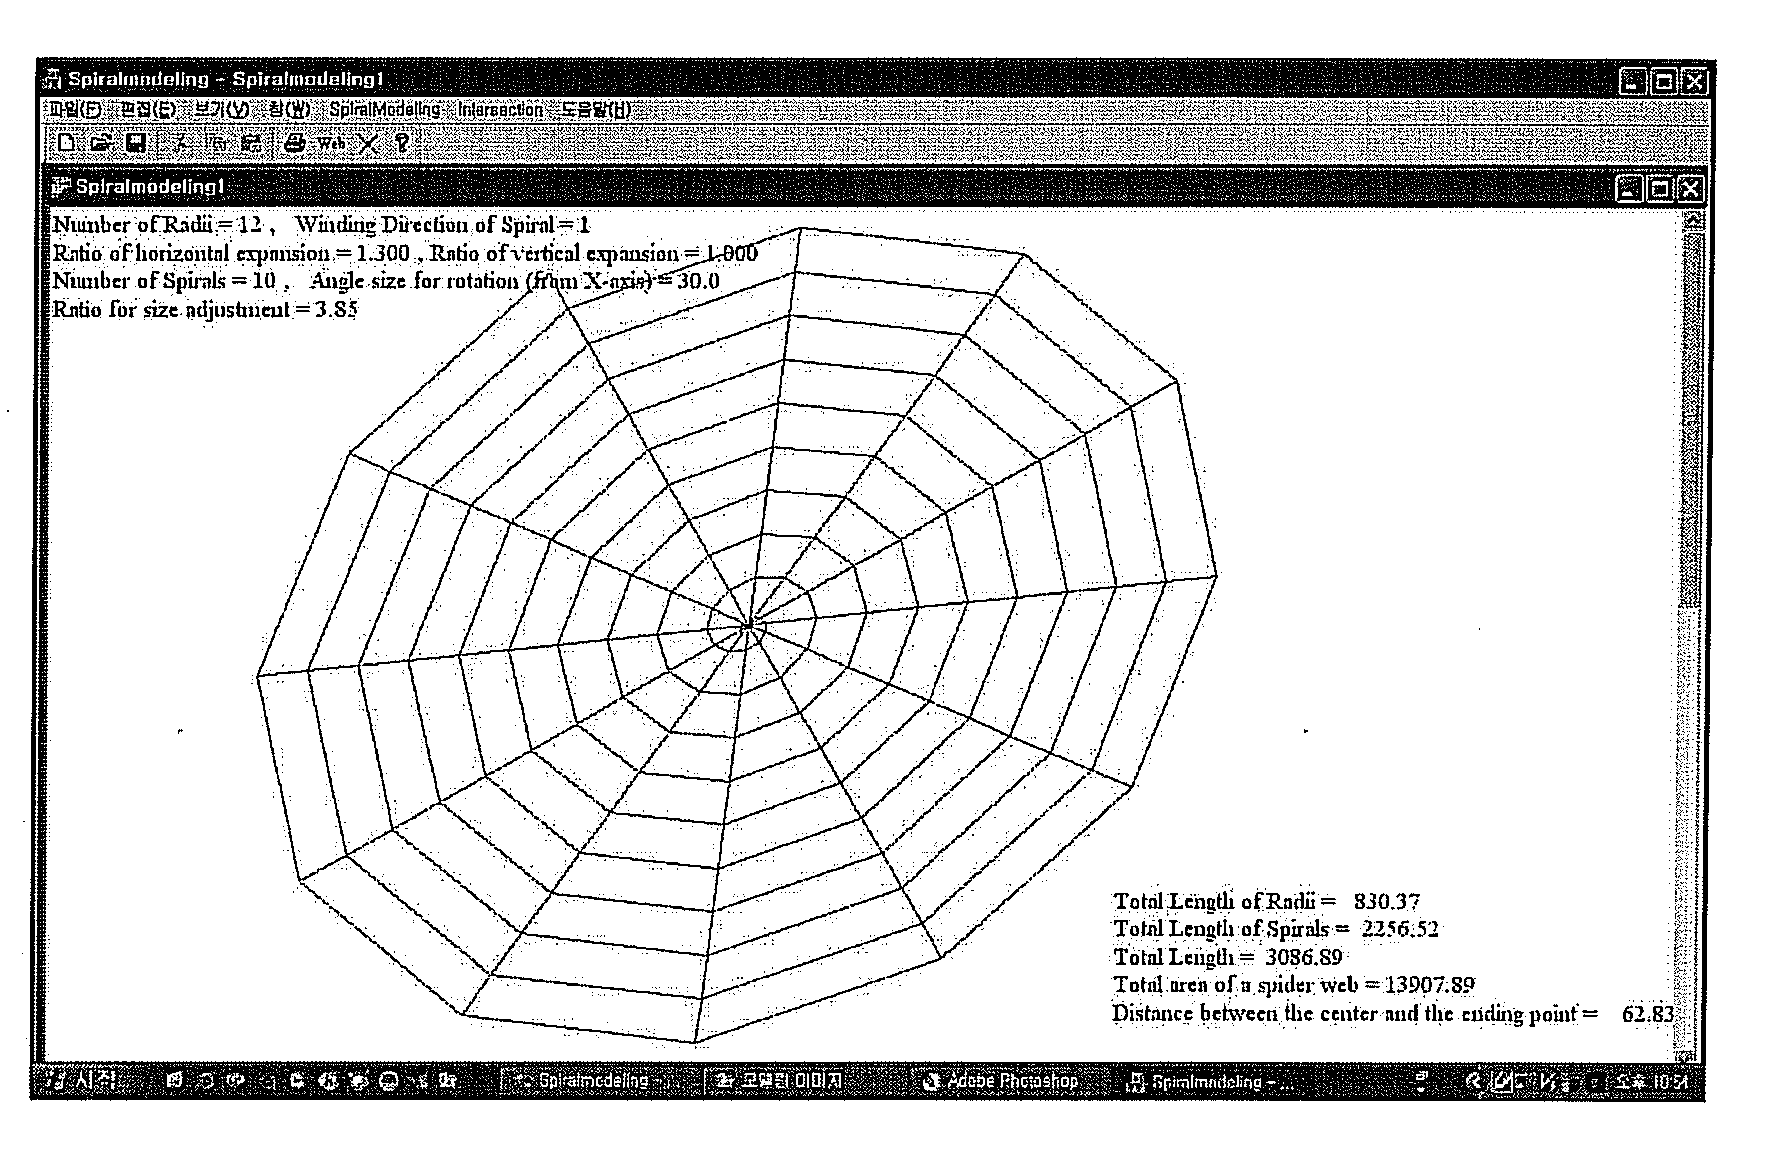 Method for modeling a structure of a spider web using computer programming